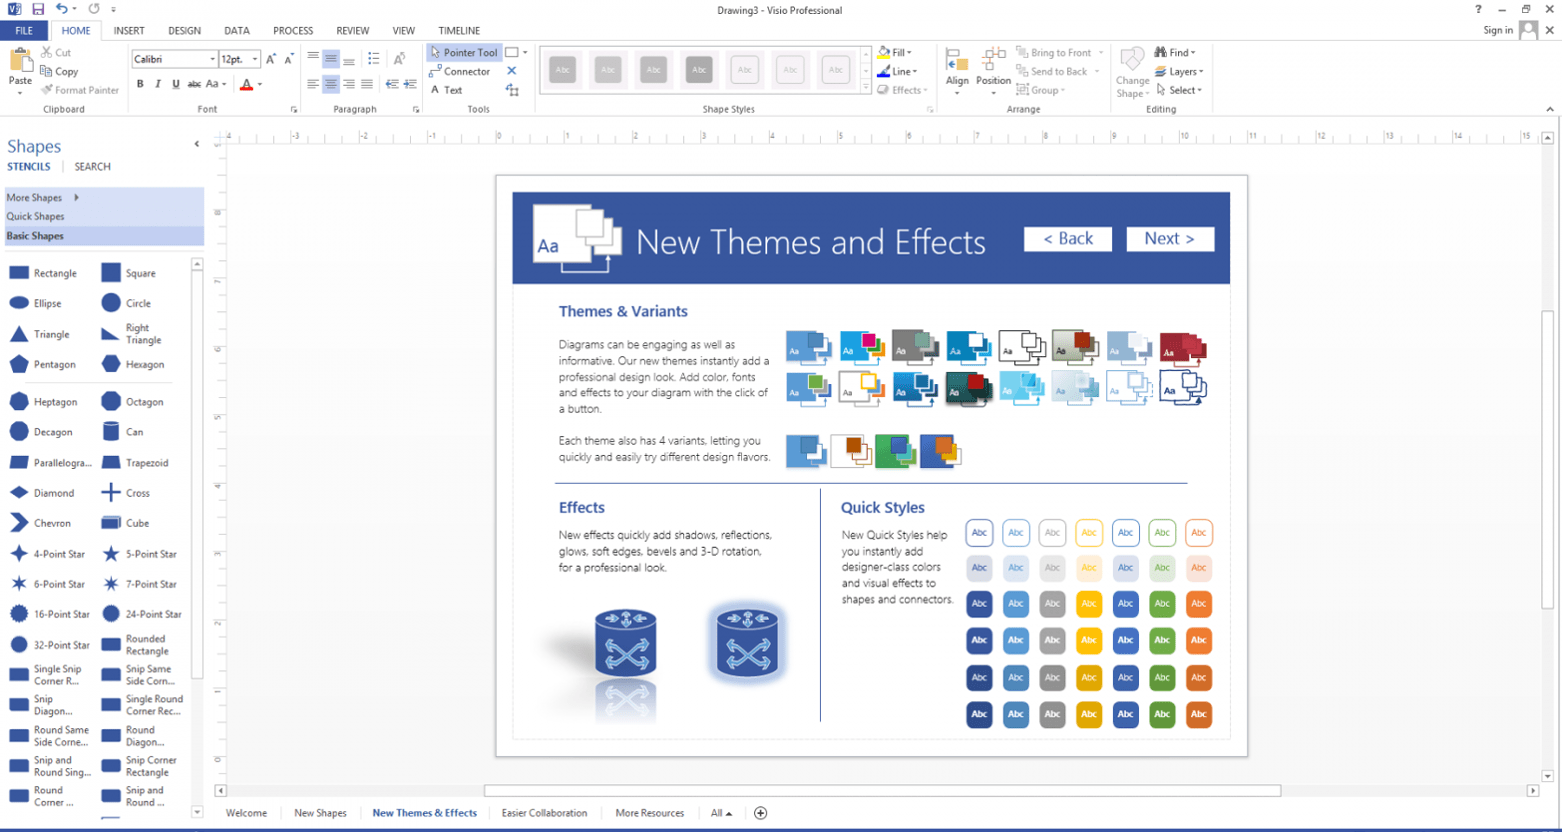 Download office visio 2007 professional